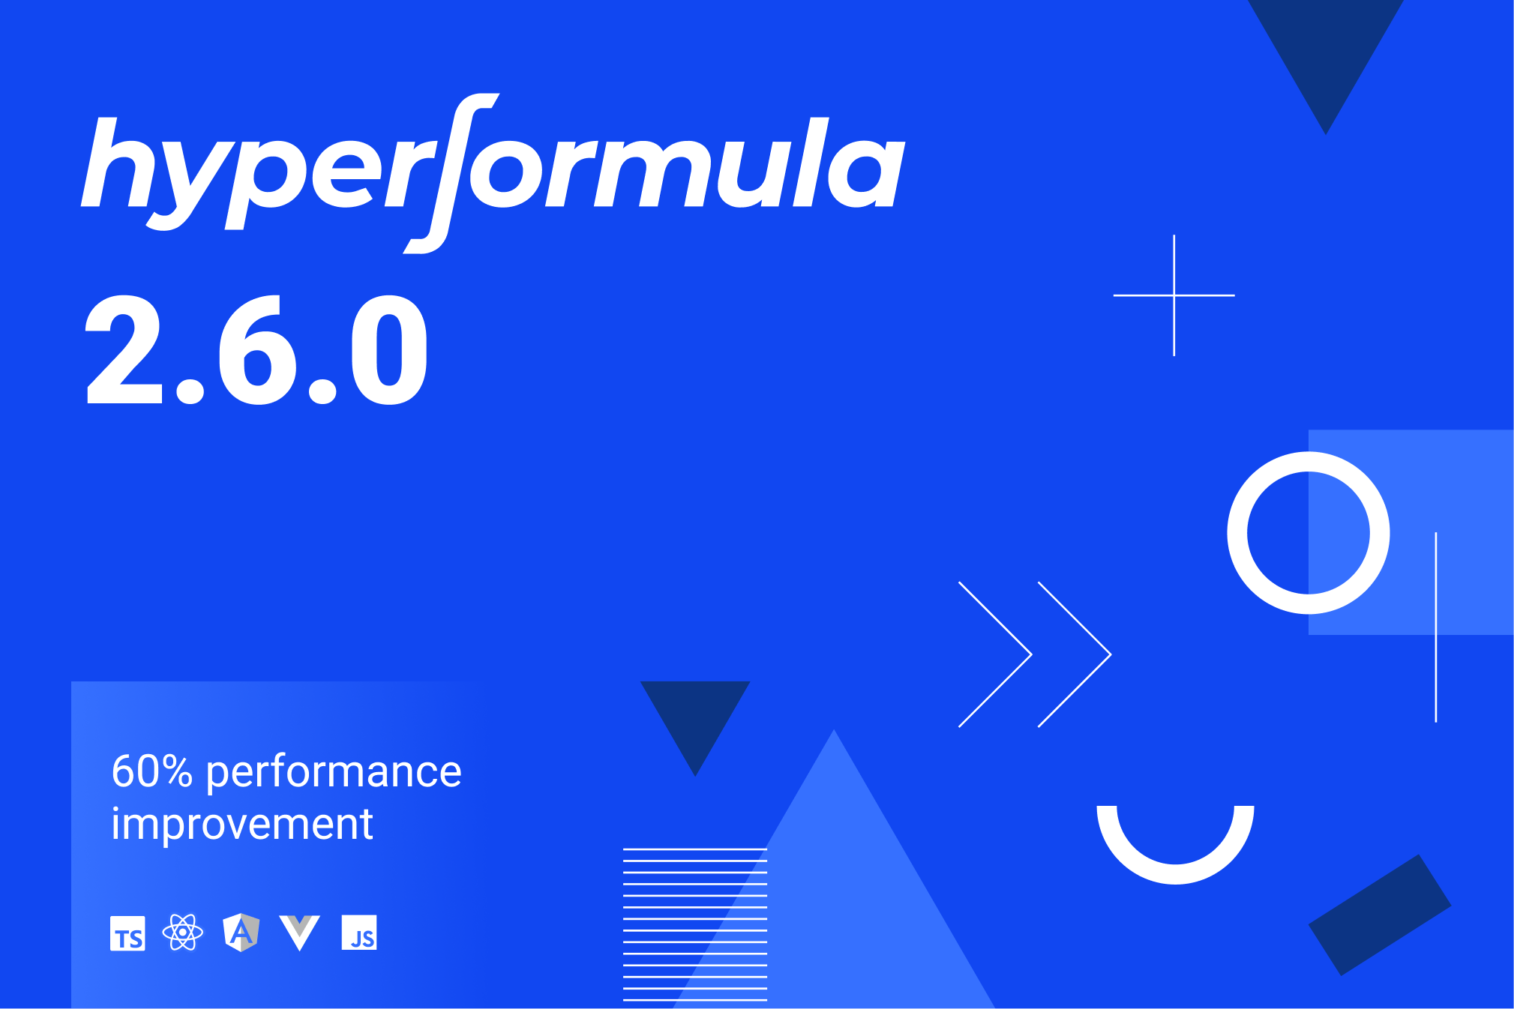 HyperFormula 2.6.0: Performance improved by 60%